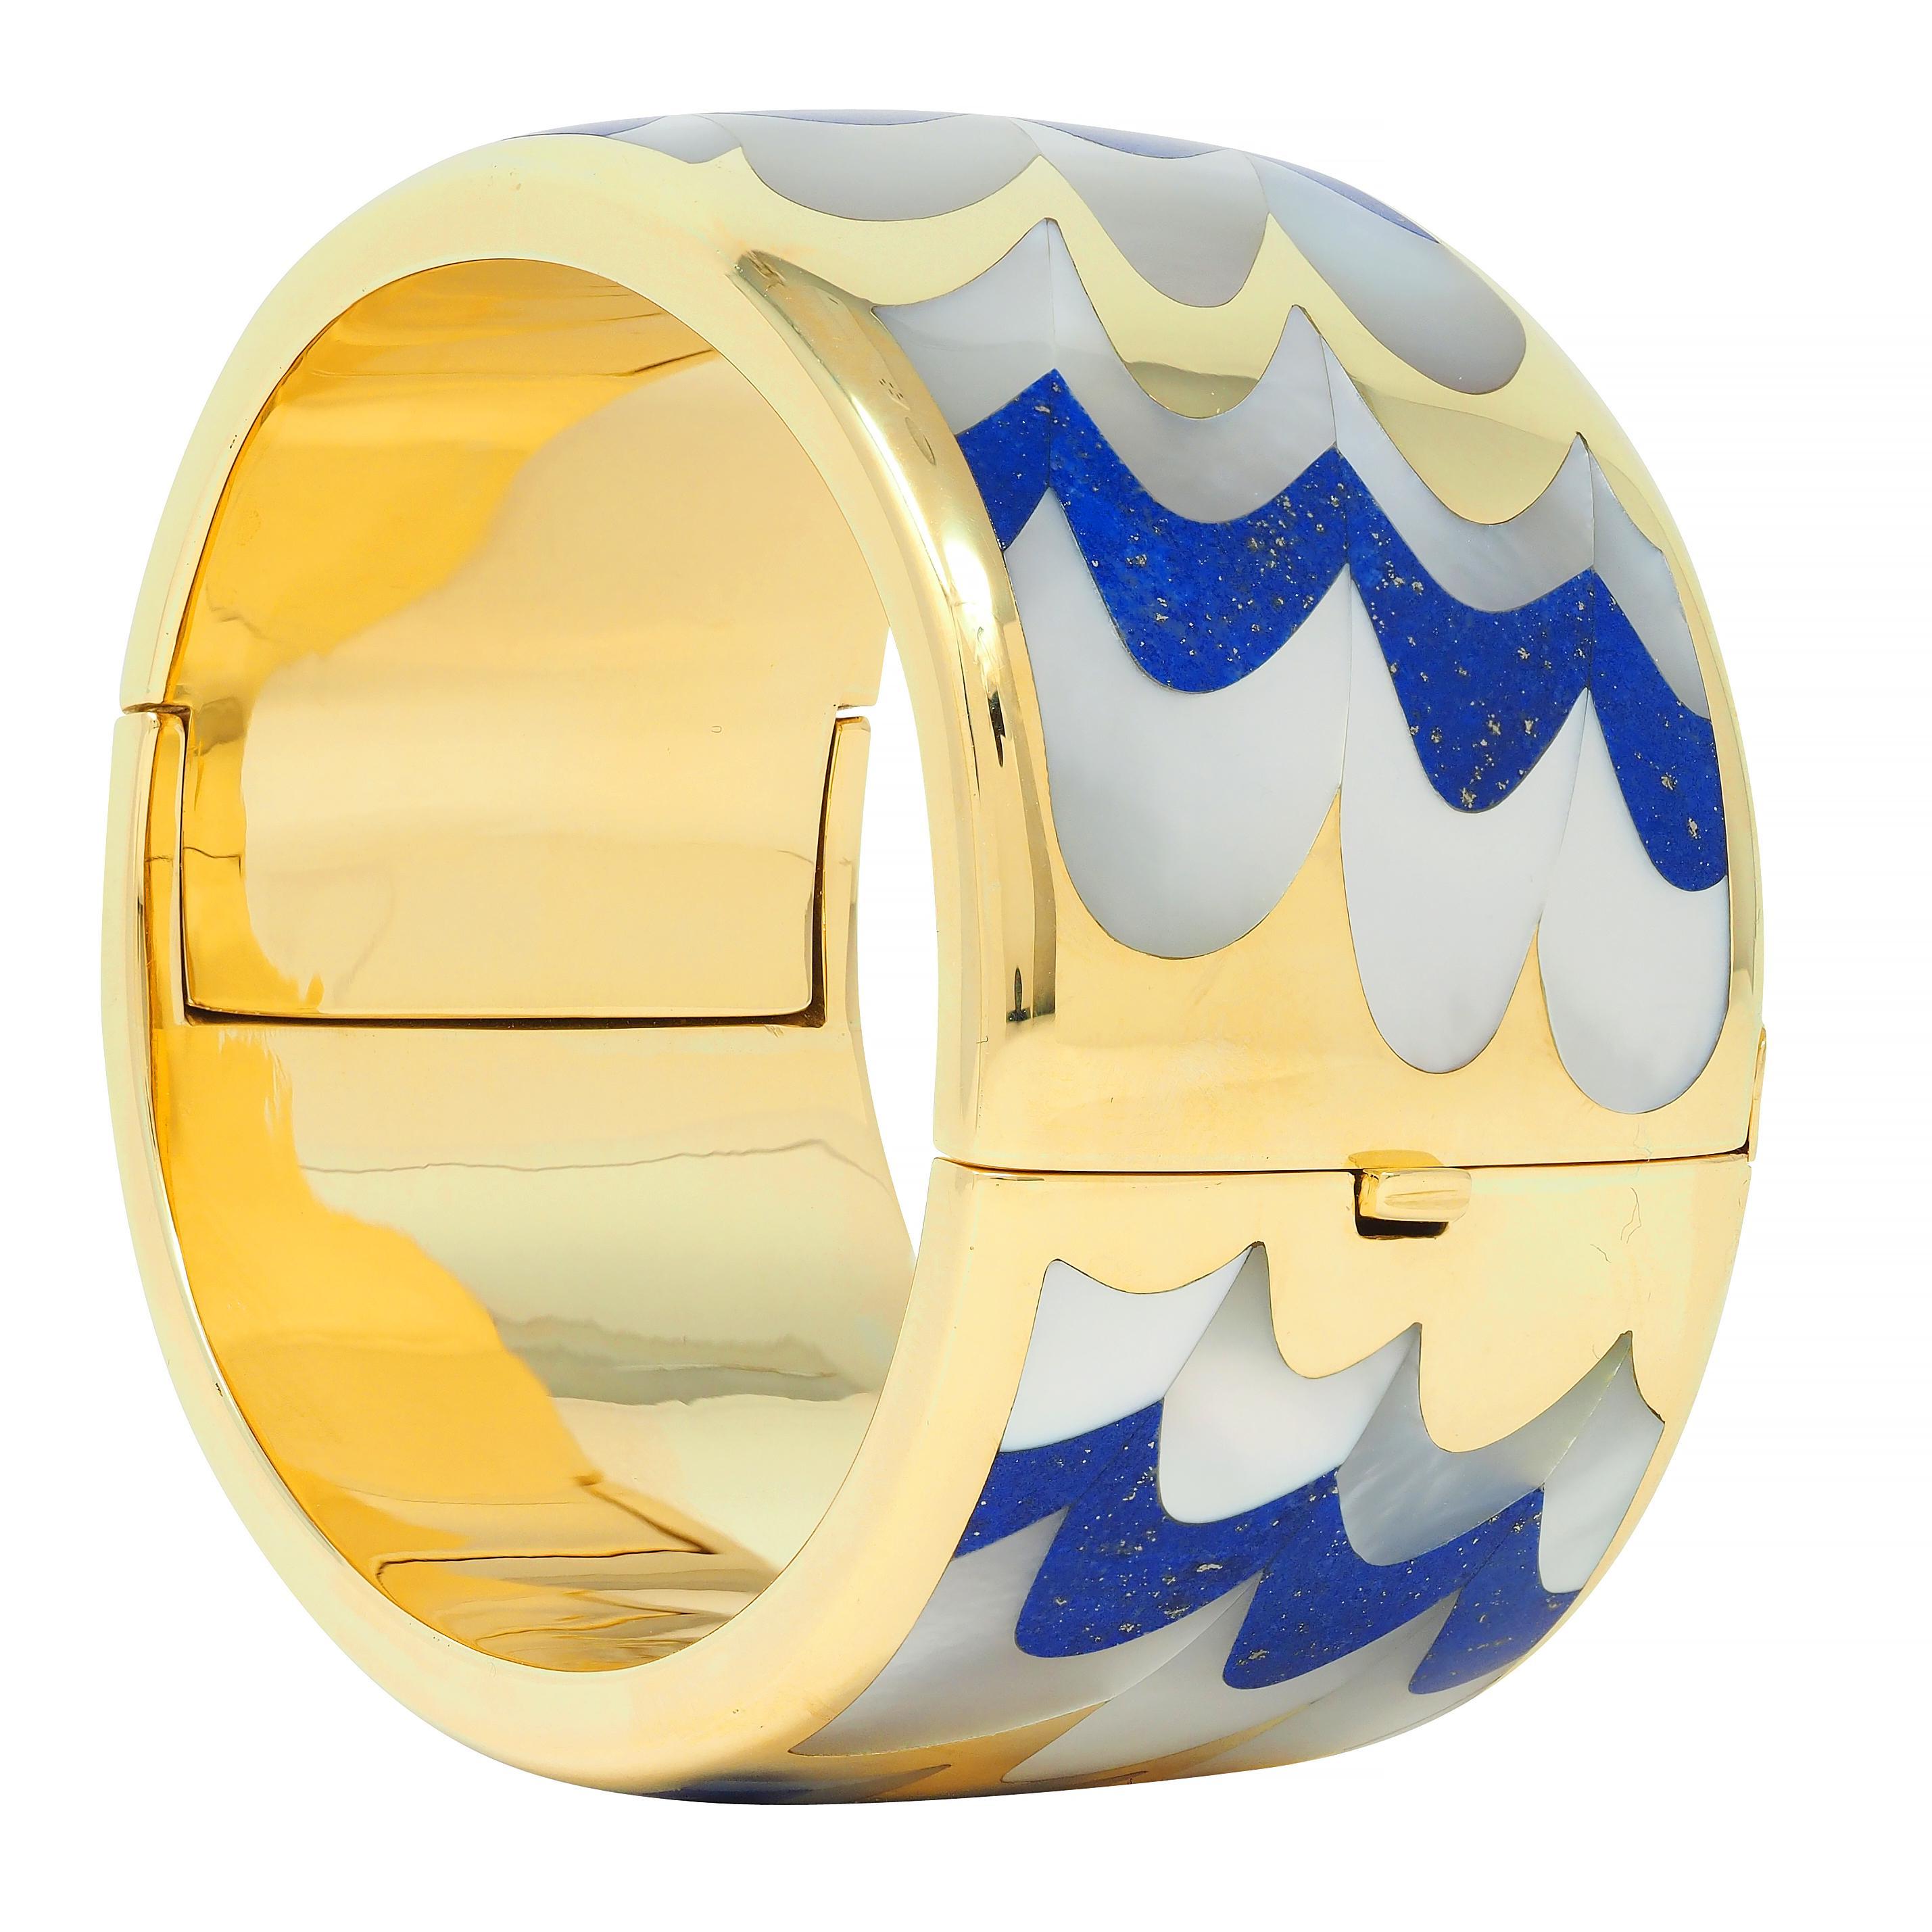 Designed as a wide bangle bracelet with curved surface with an inlaid scallop motif pattern
Featuring lapis lazuli and mother-of-pearl alternating in pattern 
Lapis is opaque ultramarine blue with moderate pyrite flecking 
Mother-of-pearl is white